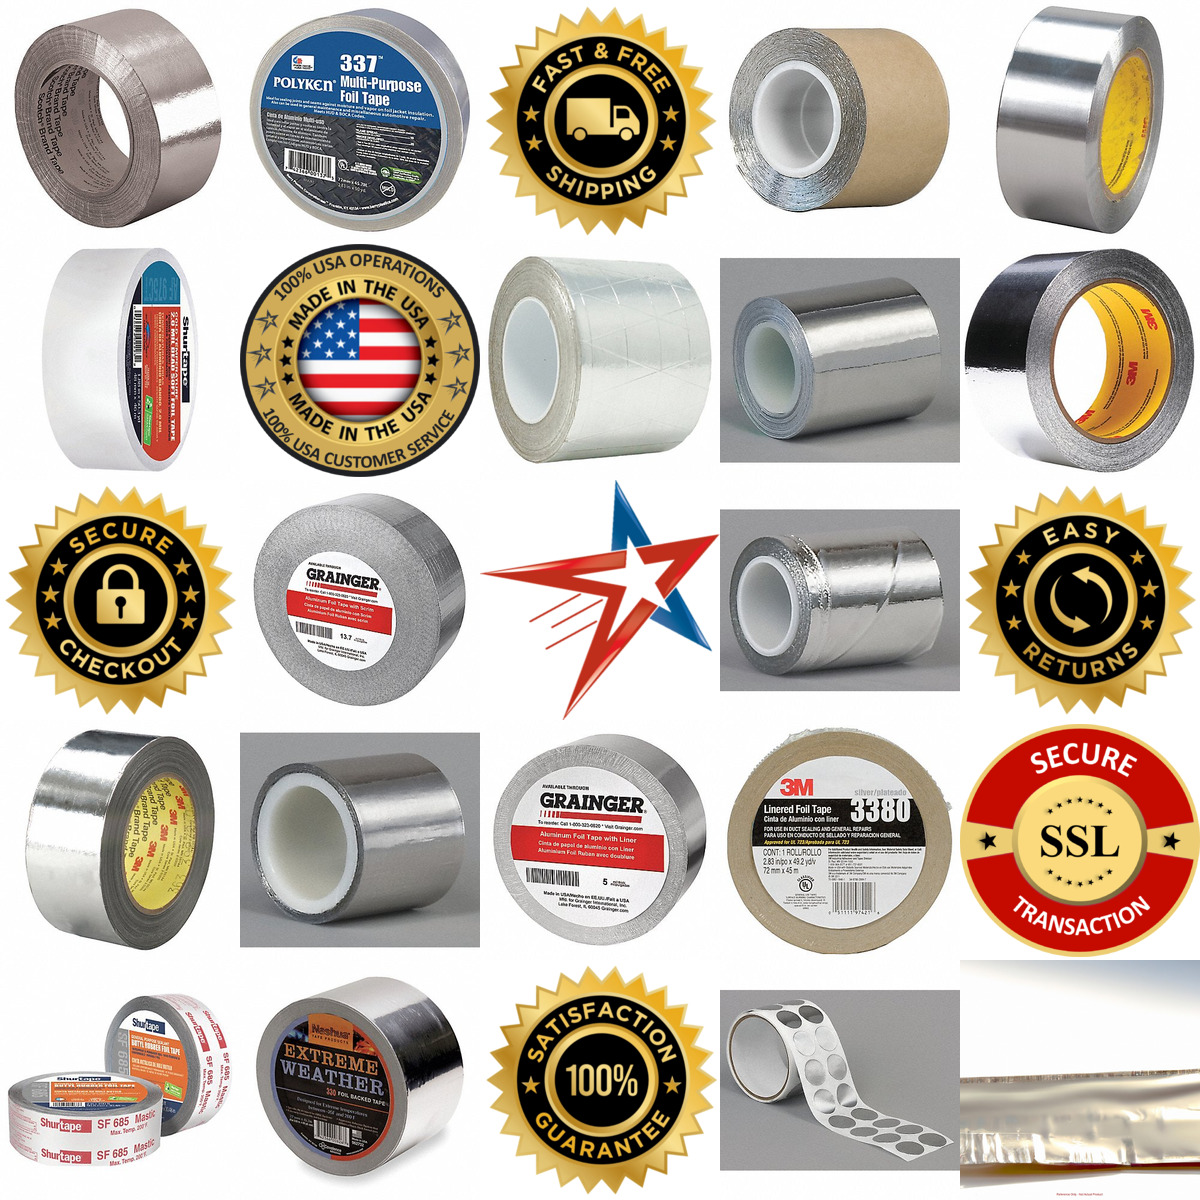 A selection of Foil Tape products on GoVets